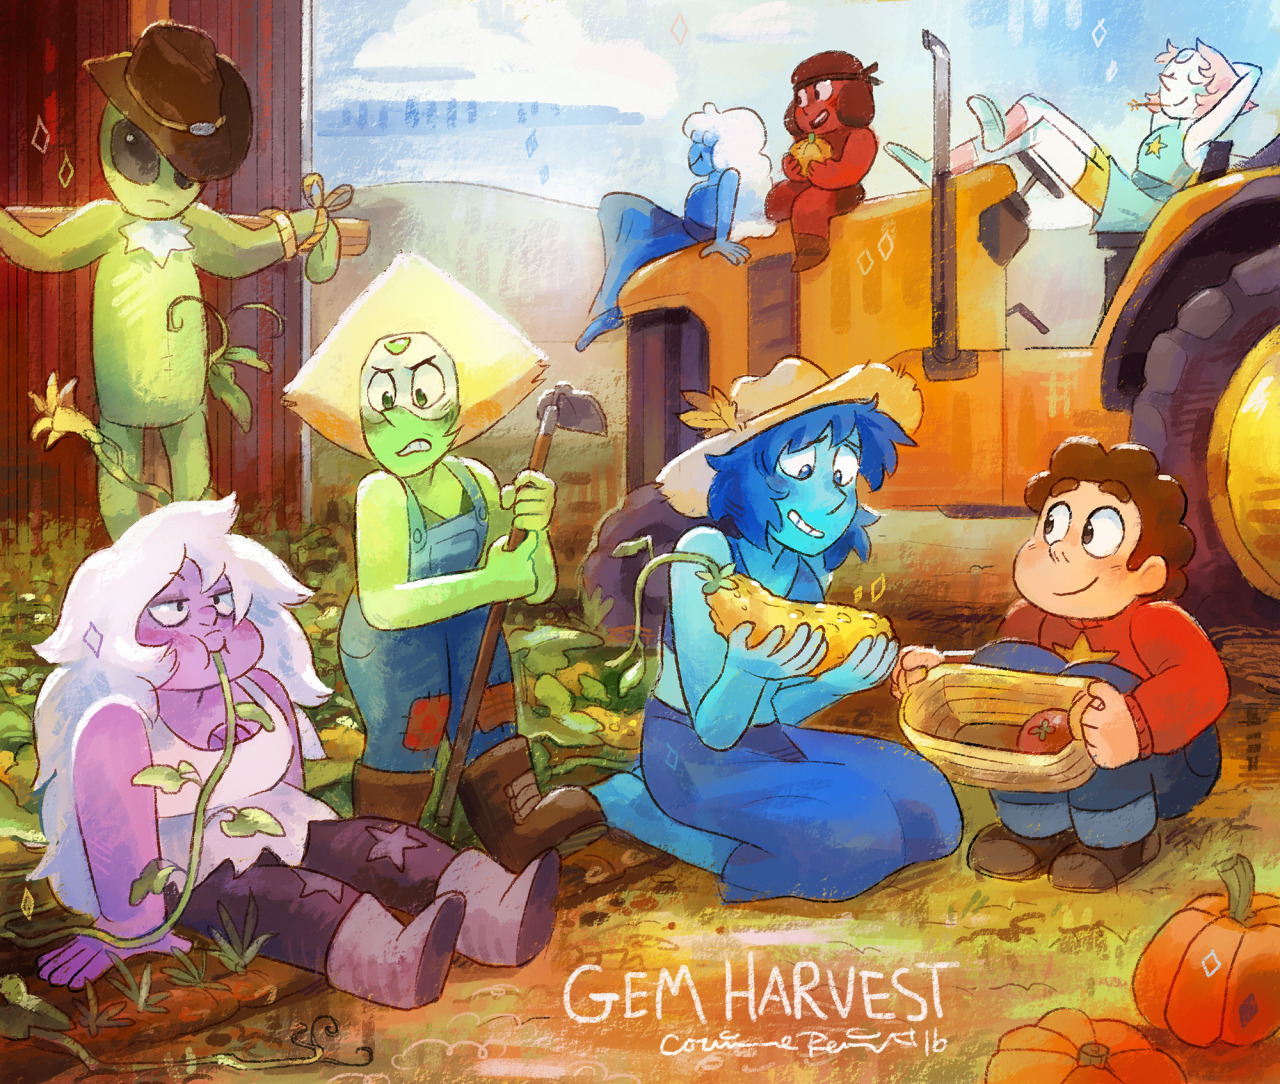 calonarang:
“ My overly optimistic prediction for Gem Harvest. I’m not ready for plot heavy episodes yet, thanks!! Give me more fluff
”